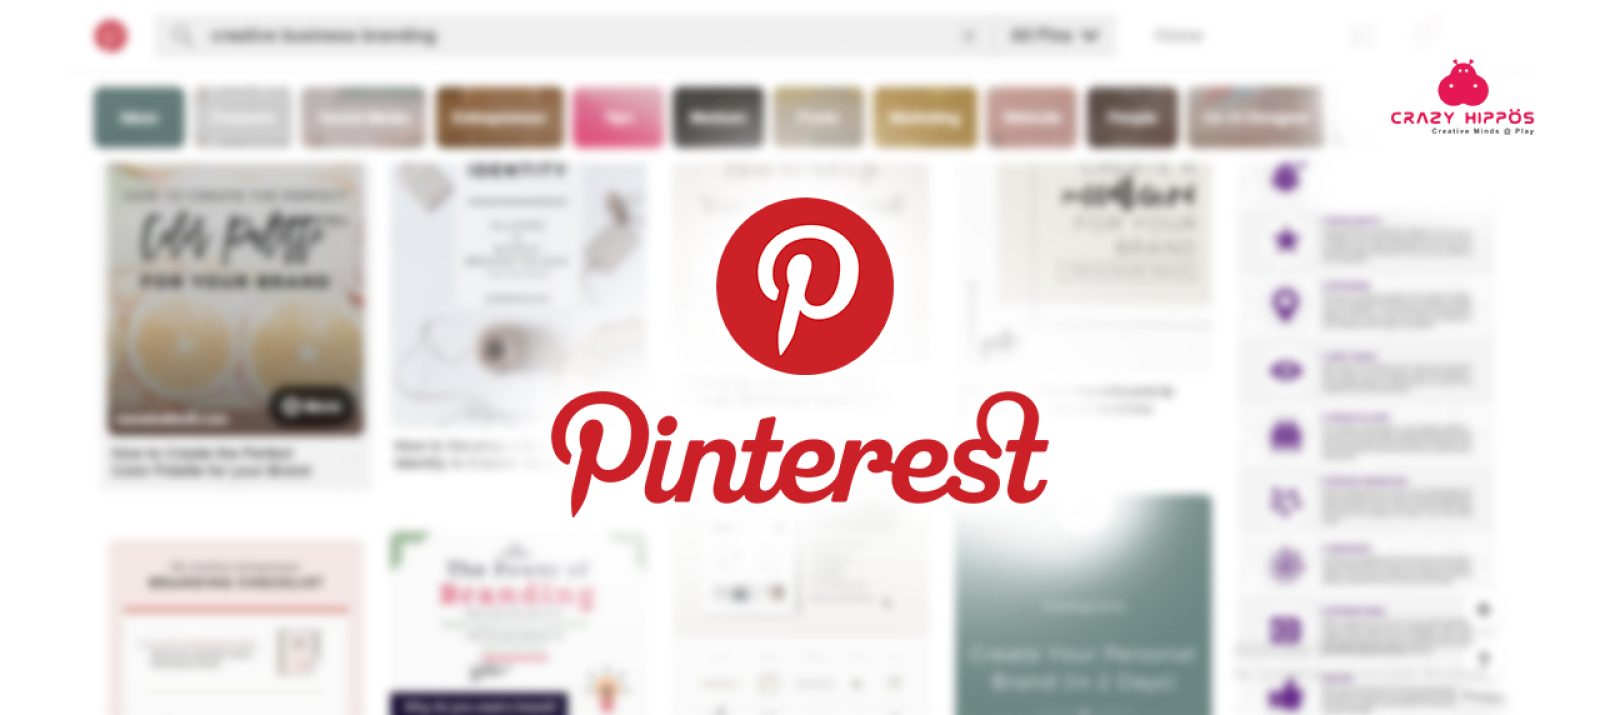 TOP 3 REASONS WHY PINTEREST IS GOOD FOR YOUR BRAND